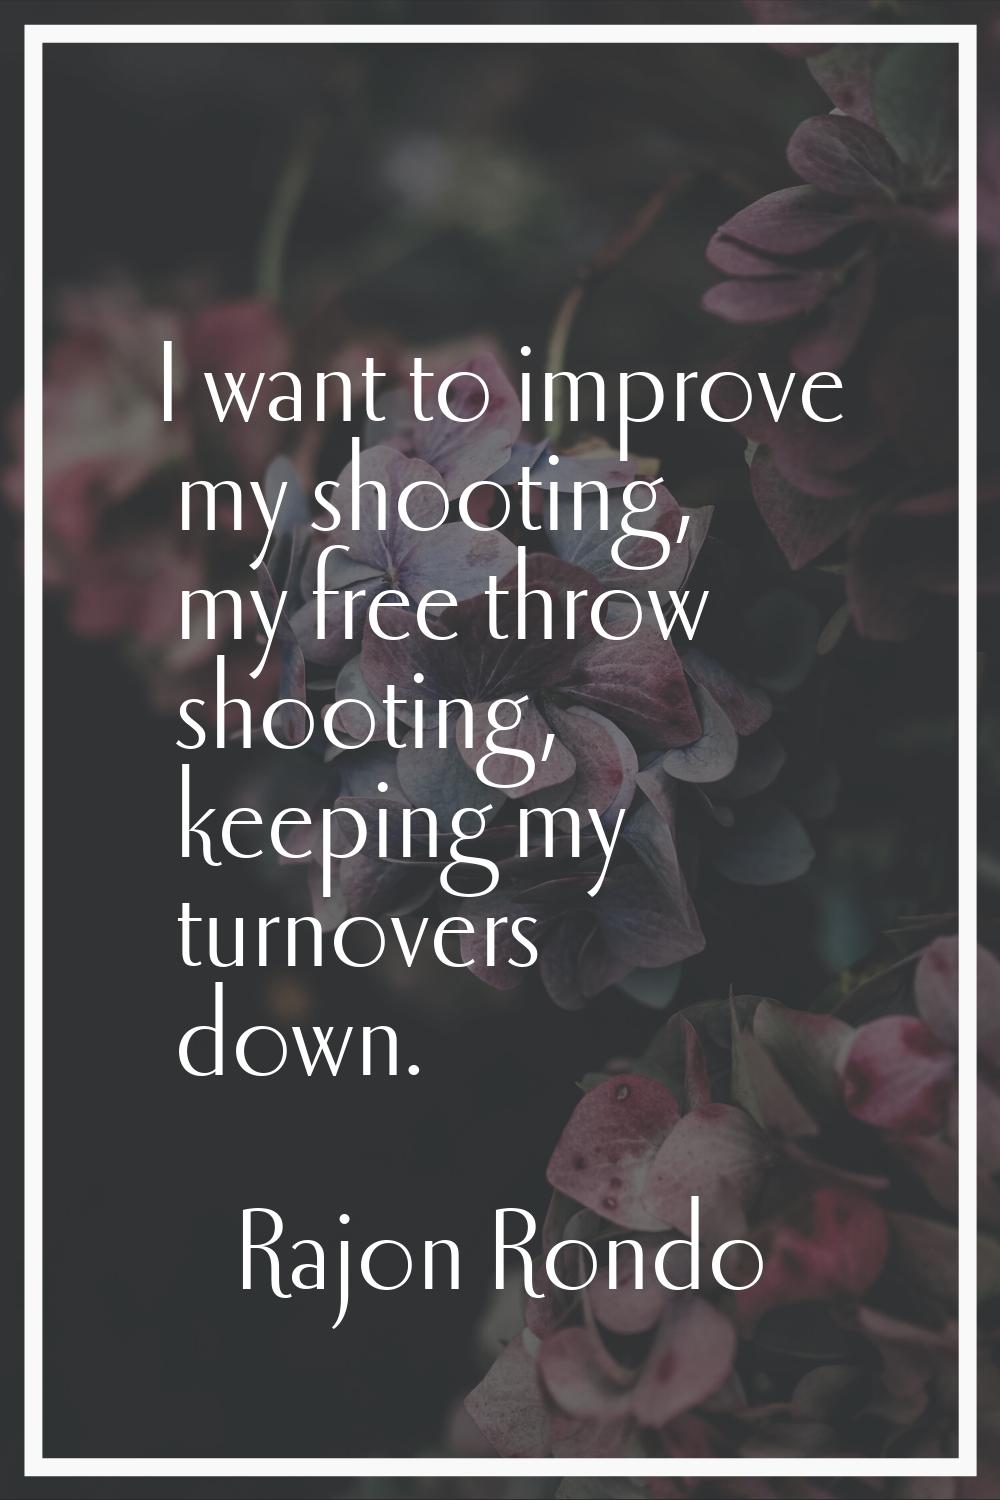 I want to improve my shooting, my free throw shooting, keeping my turnovers down.